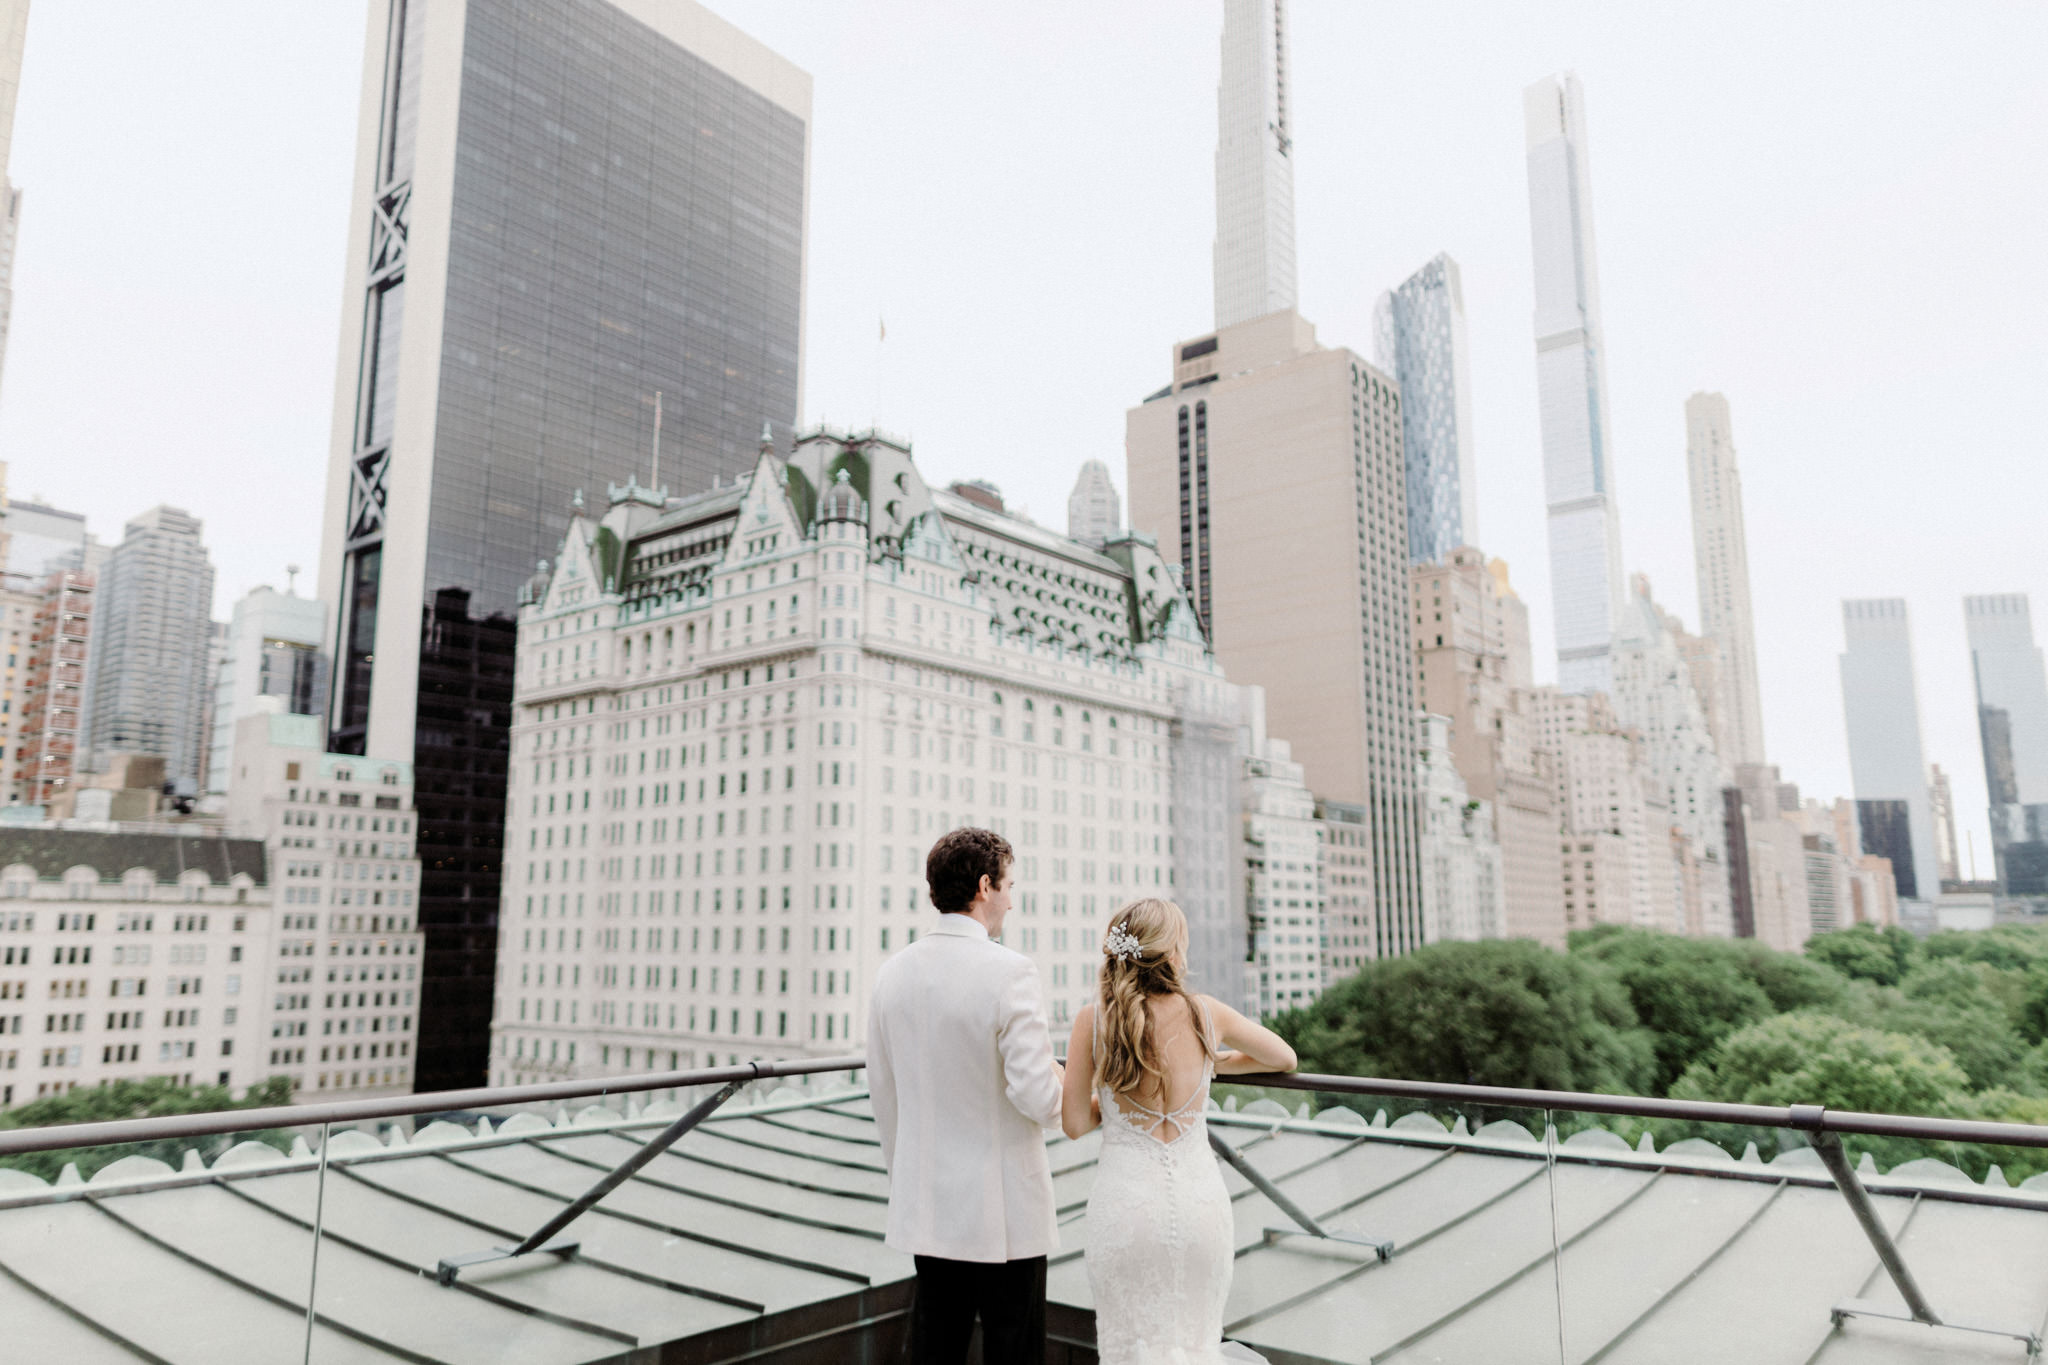 A wedding photographer takes pictures of a bride and groom on a rooftop in New York City